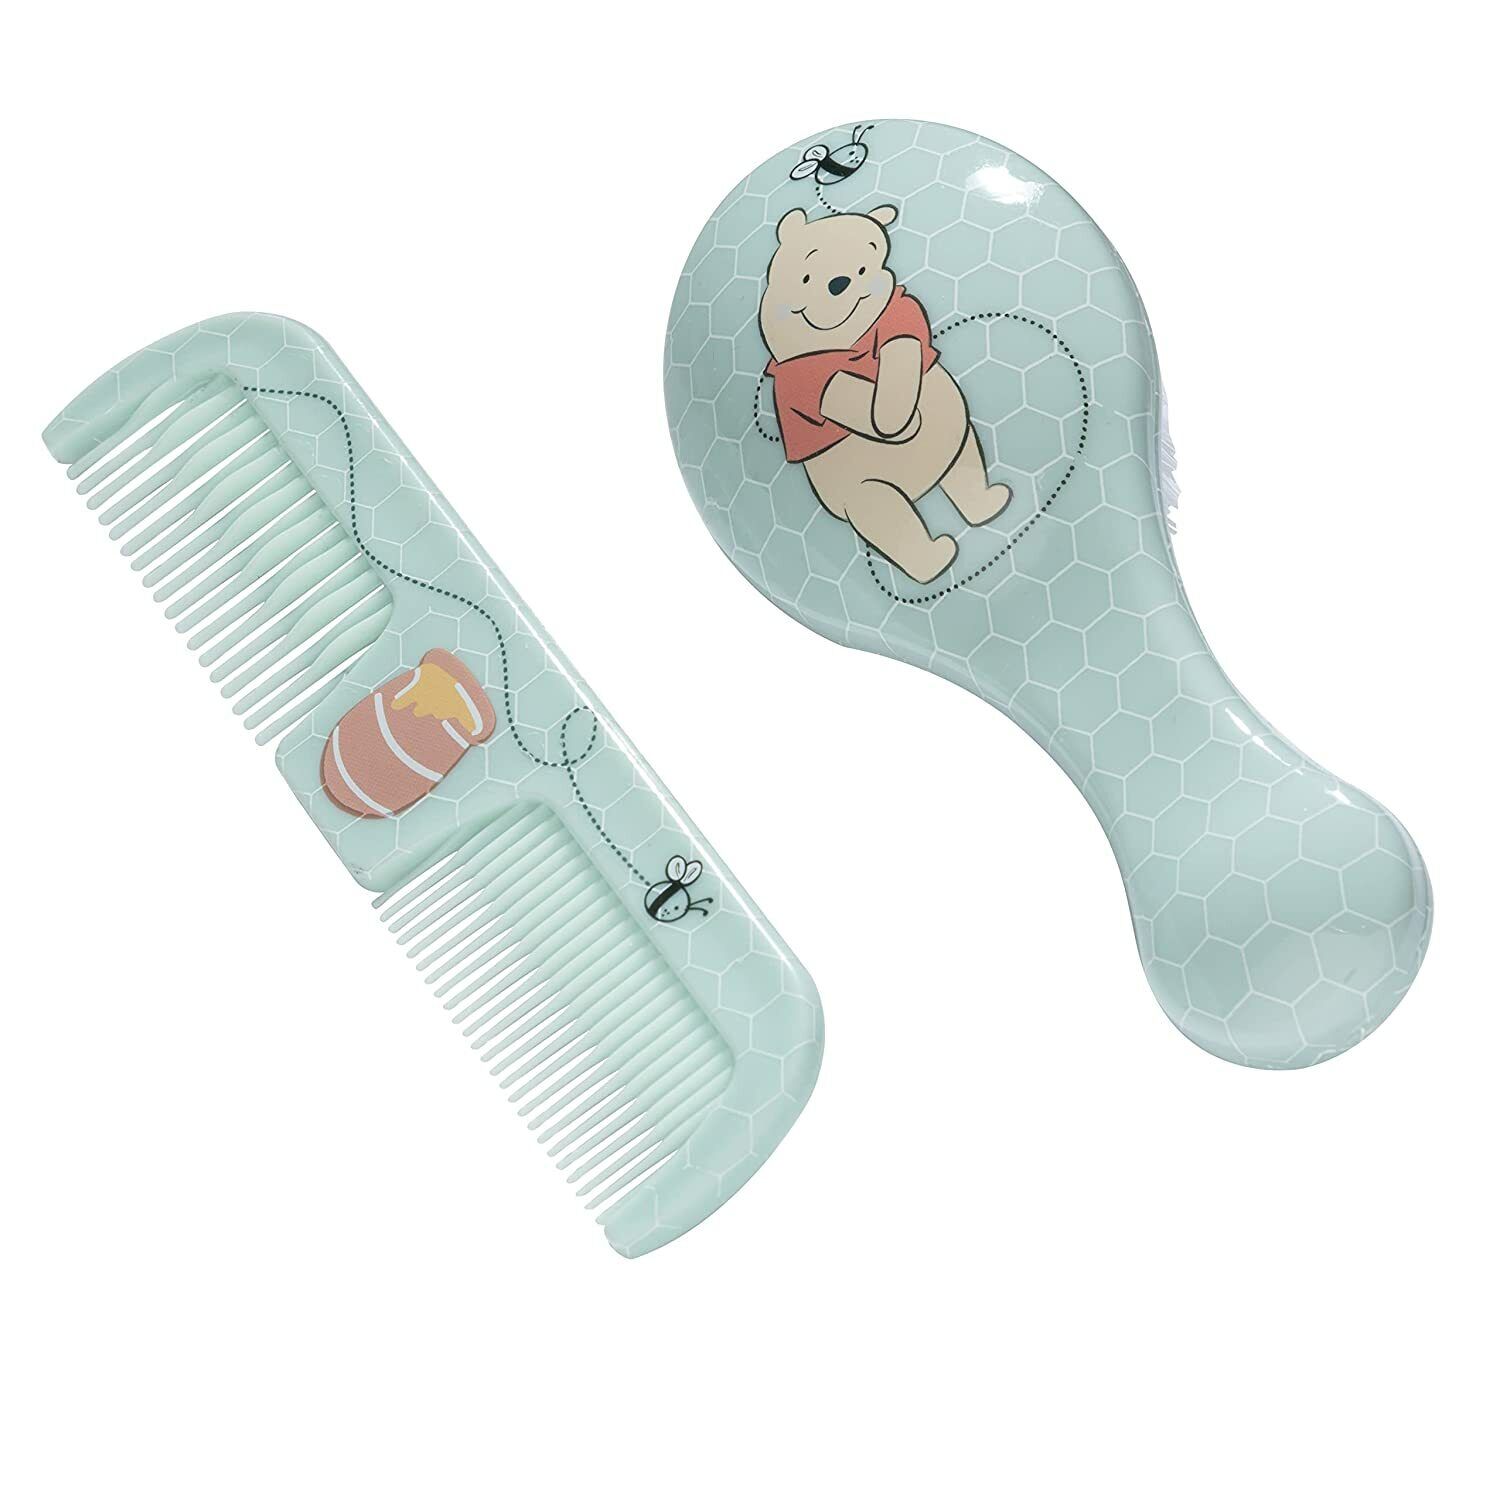 Kids Safety Health Disney Baby Winnie The Pooh Style Brush Comb Set Tools